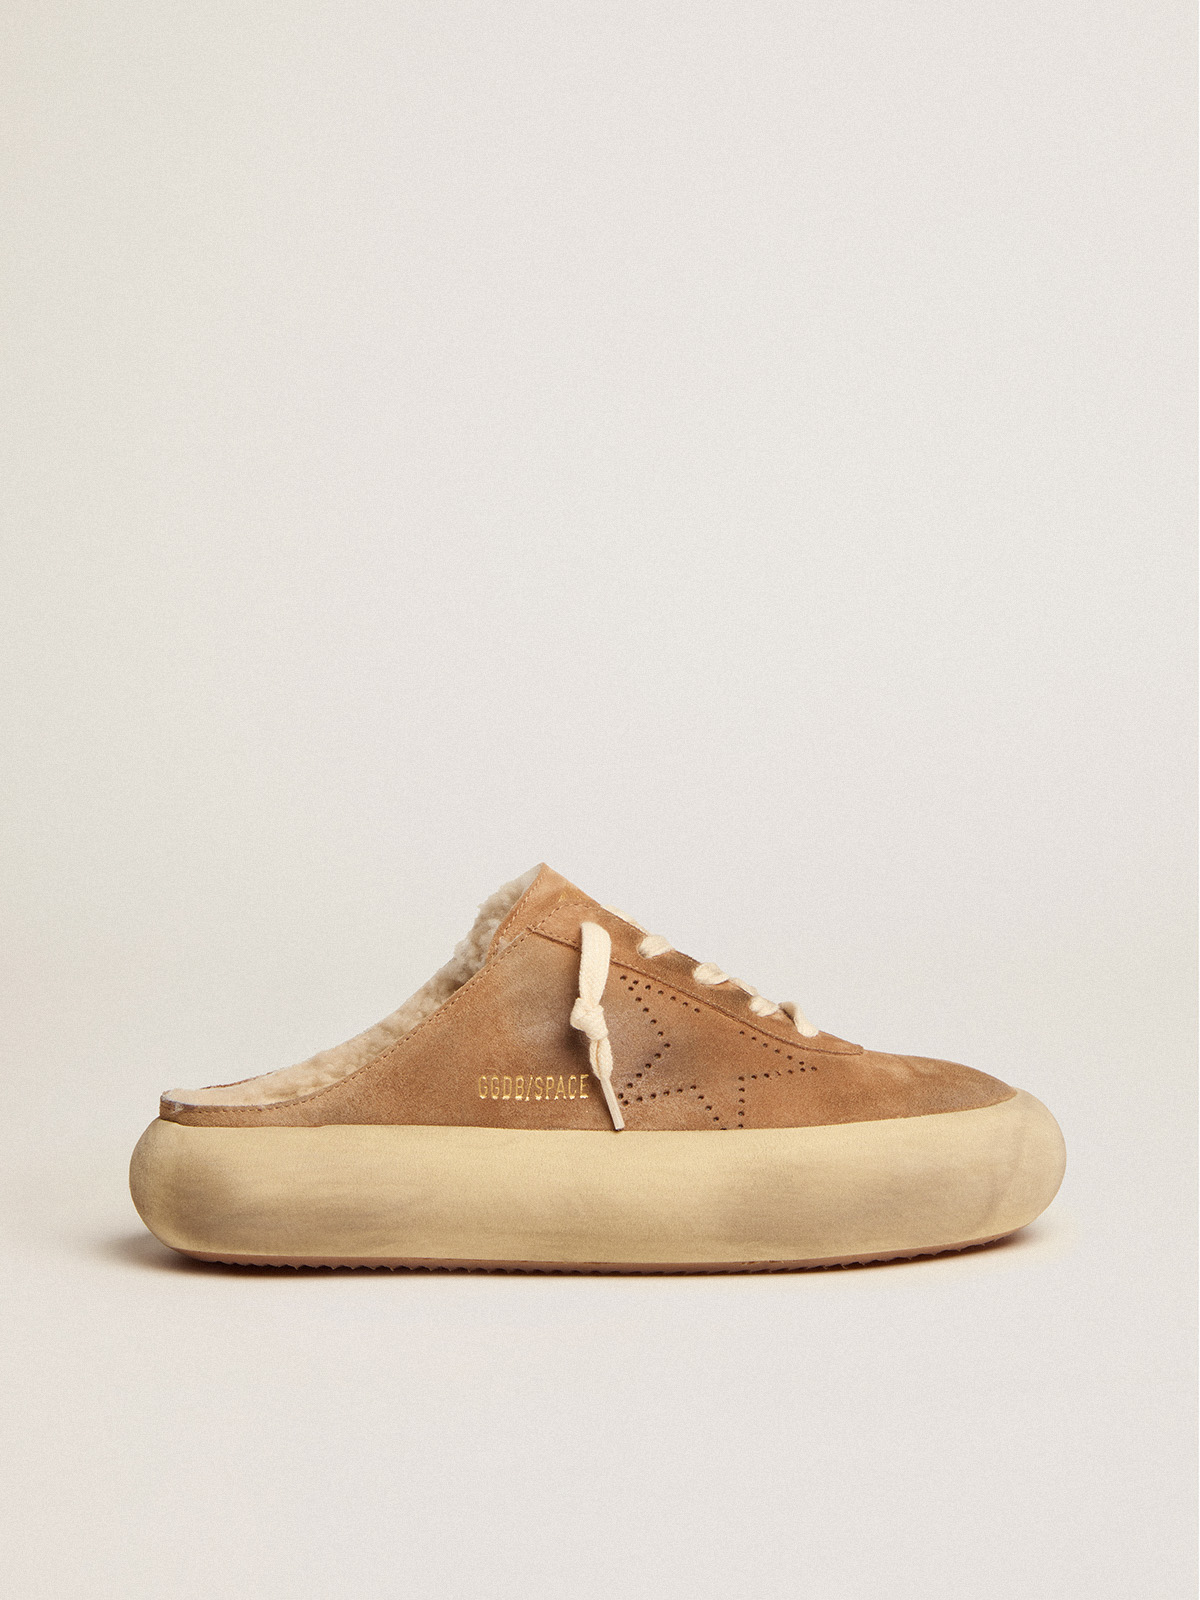 Women\'s Space-Star Sabot shoes in tobacco-colored suede with shearling  lining | Golden Goose